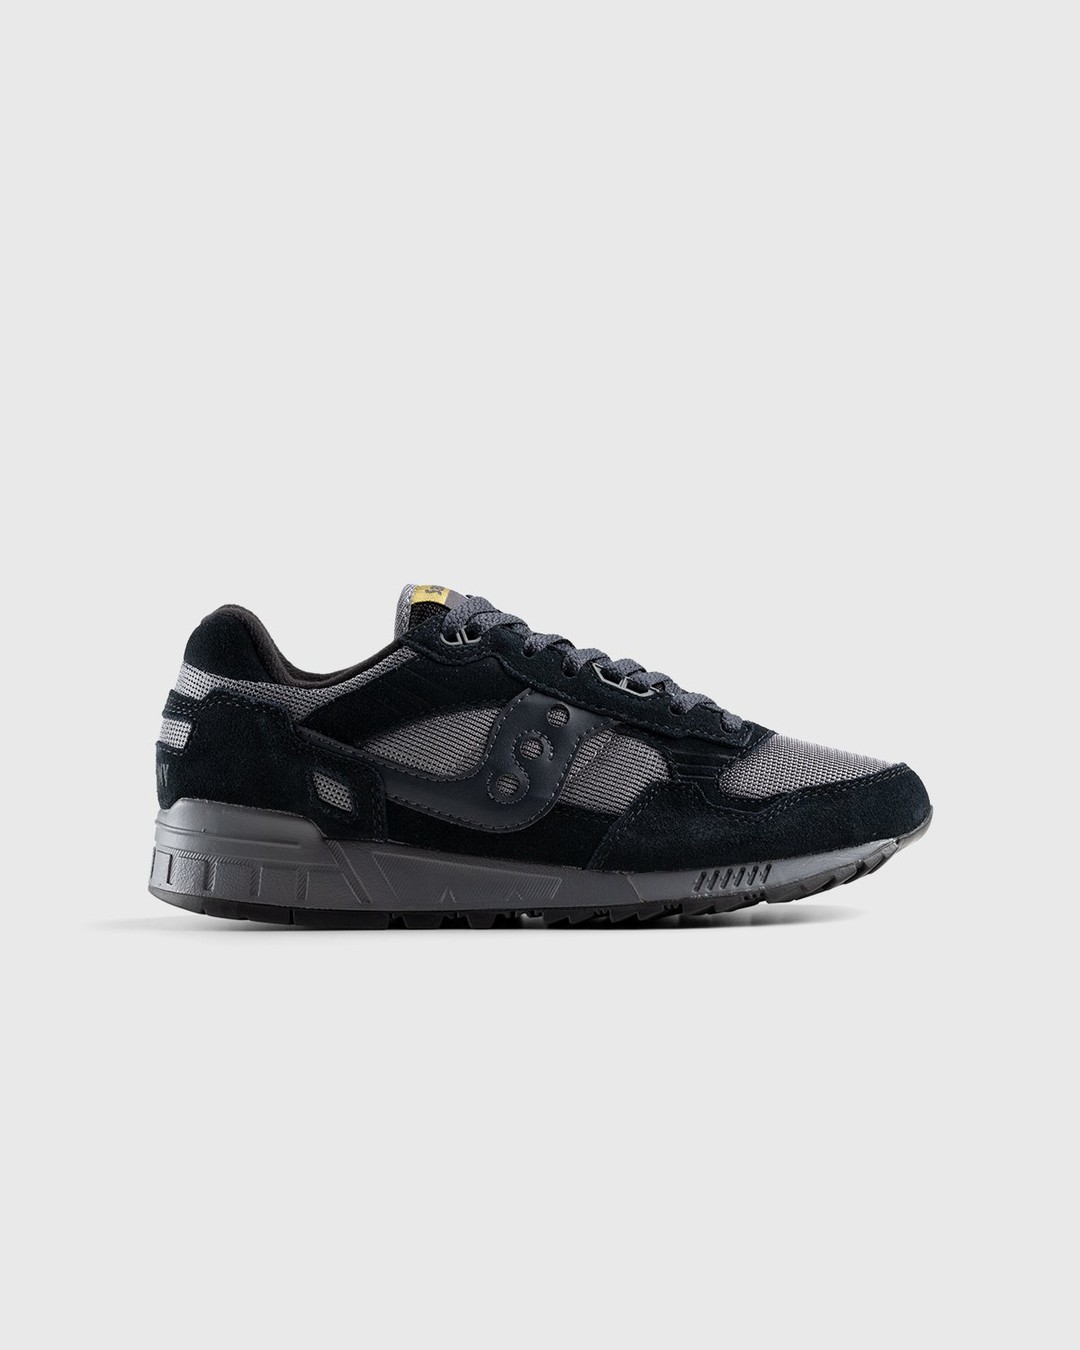 Saucony – Shadow 5000 Limo - Low Top Sneakers - Black - Image 1